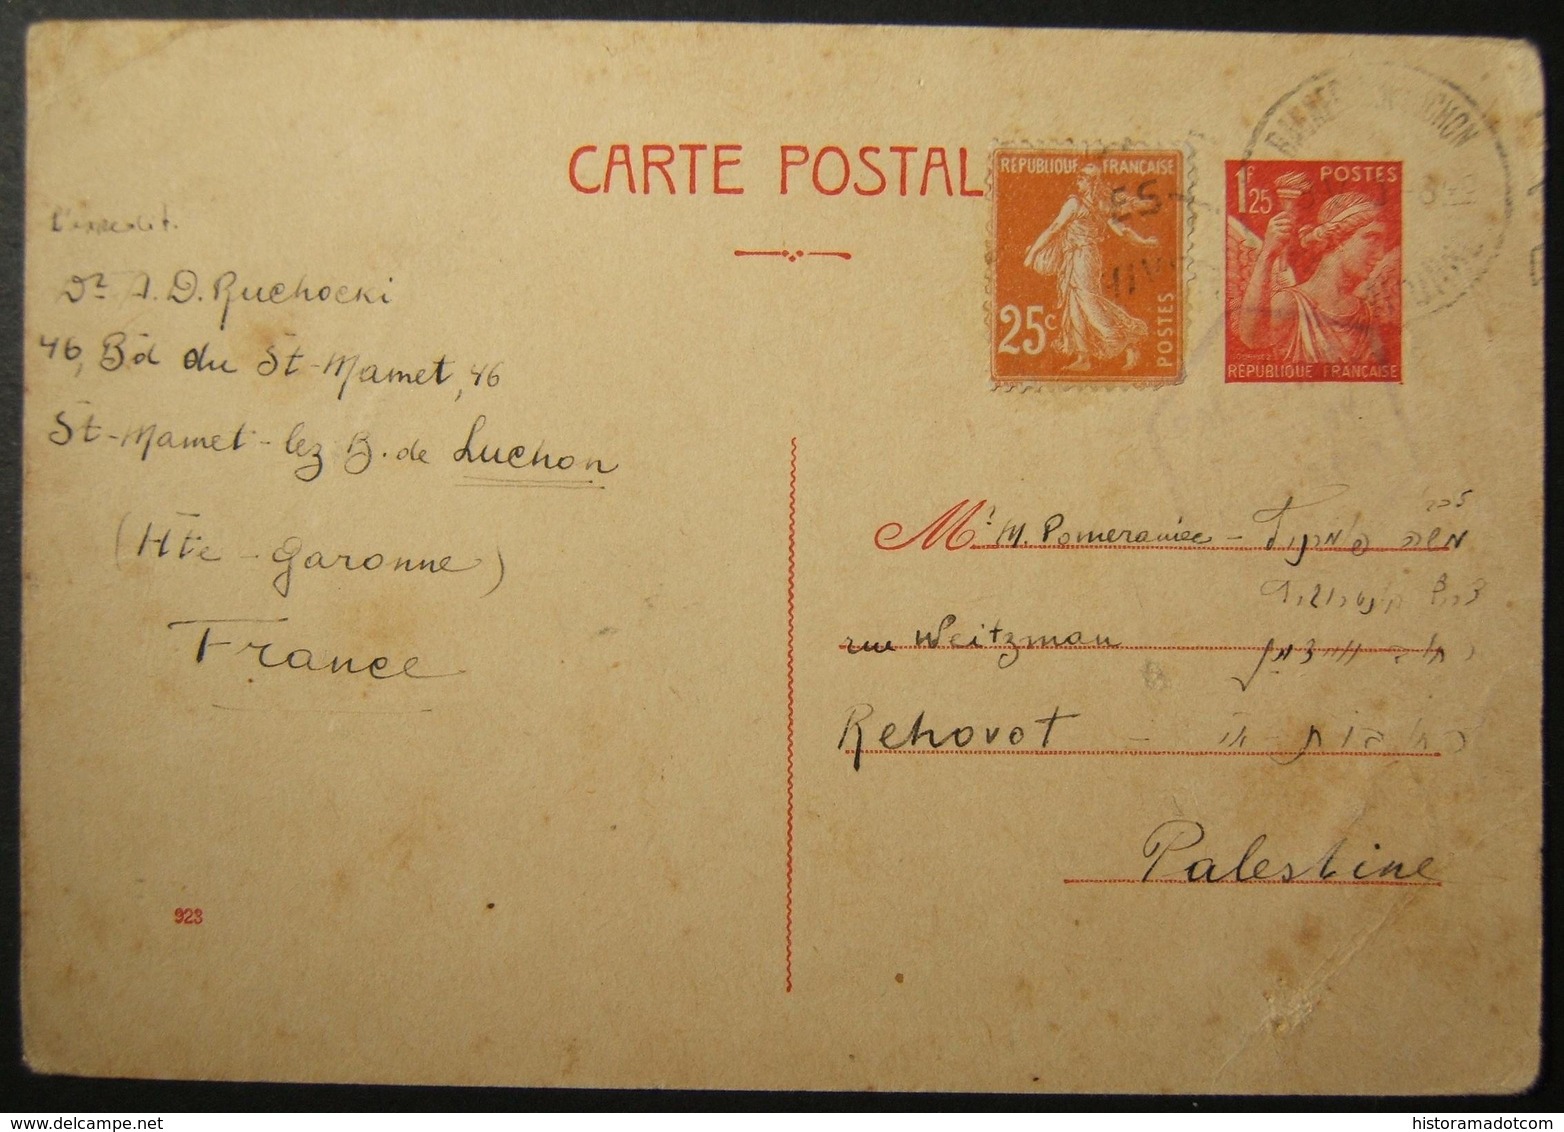 WWII/Holocaust Era/Fall Of France Yiddish Mail BAGNERES-DE-LUCHON To Palestine - WW2